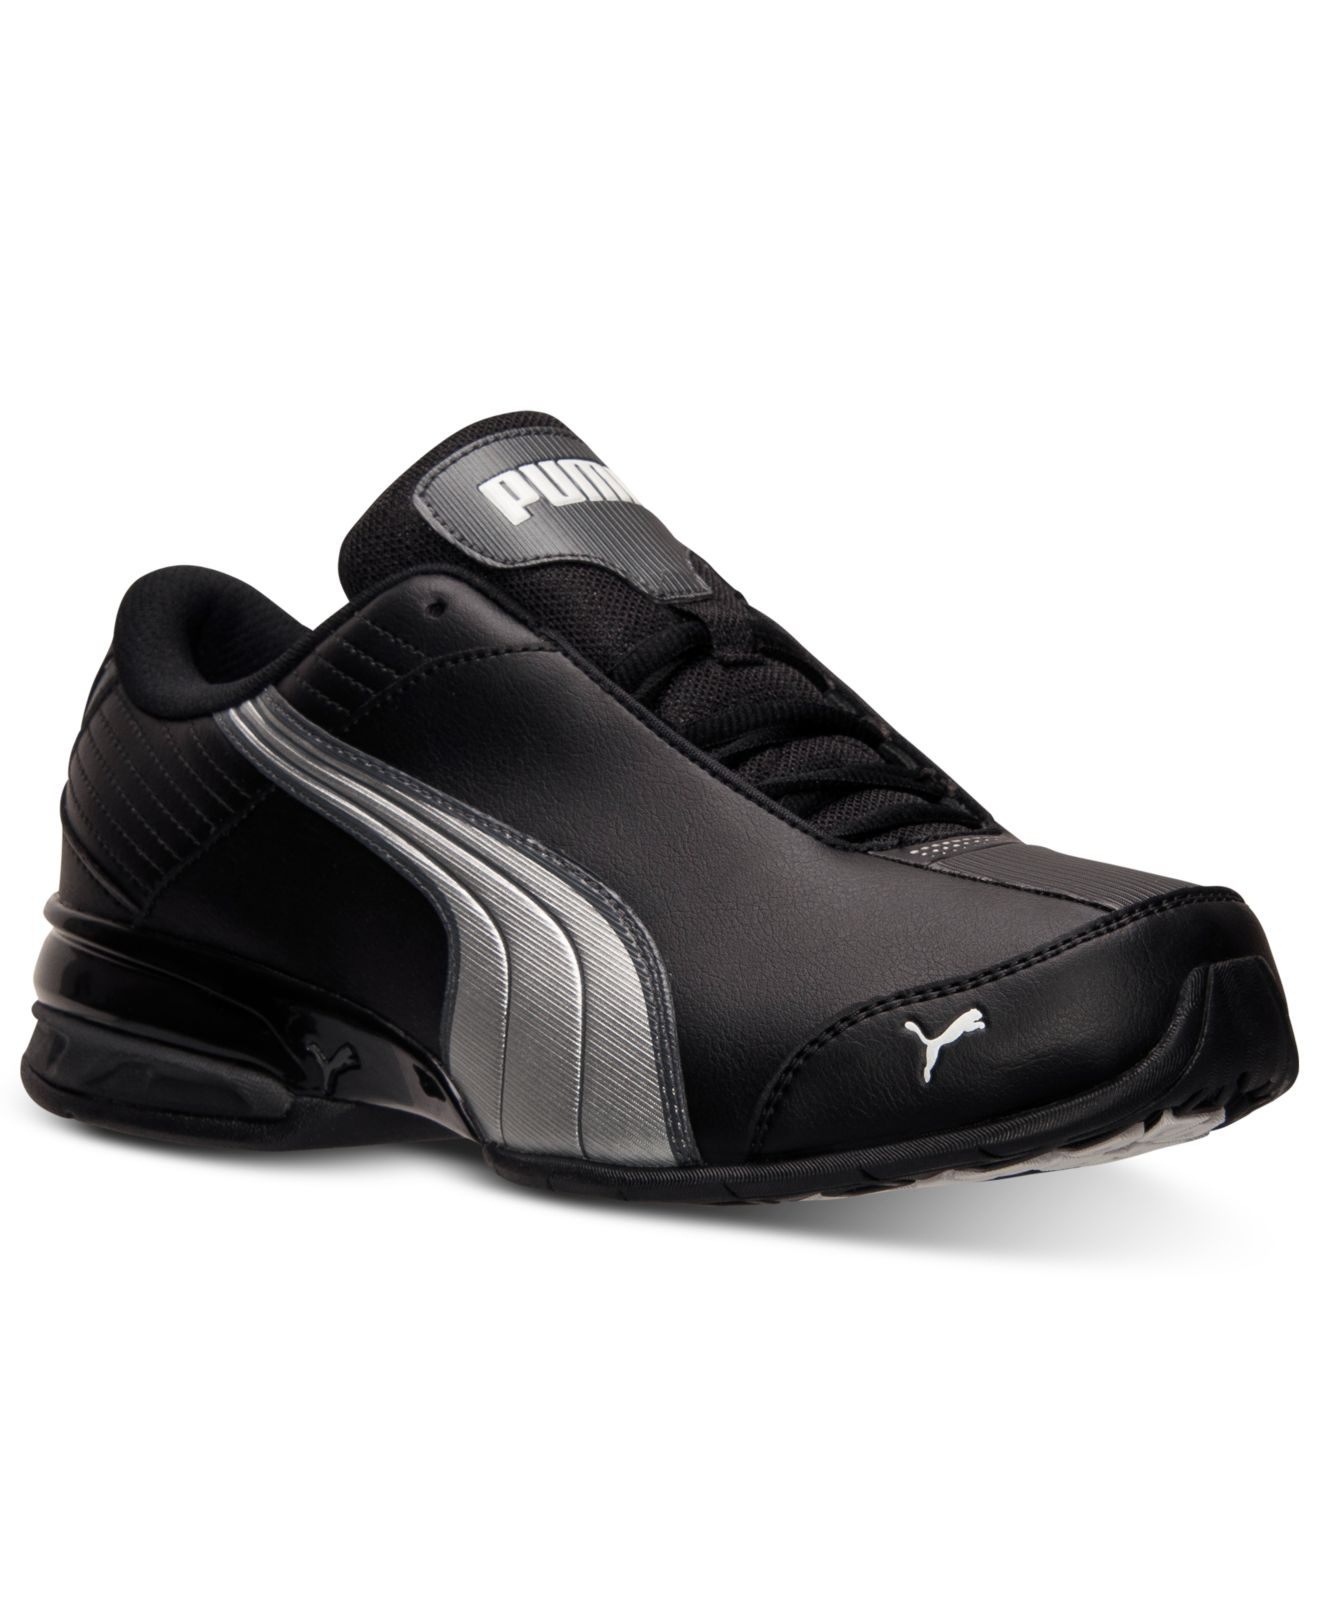 Lyst - Puma Men's Super Elevate Running Sneakers From Finish Line in ...